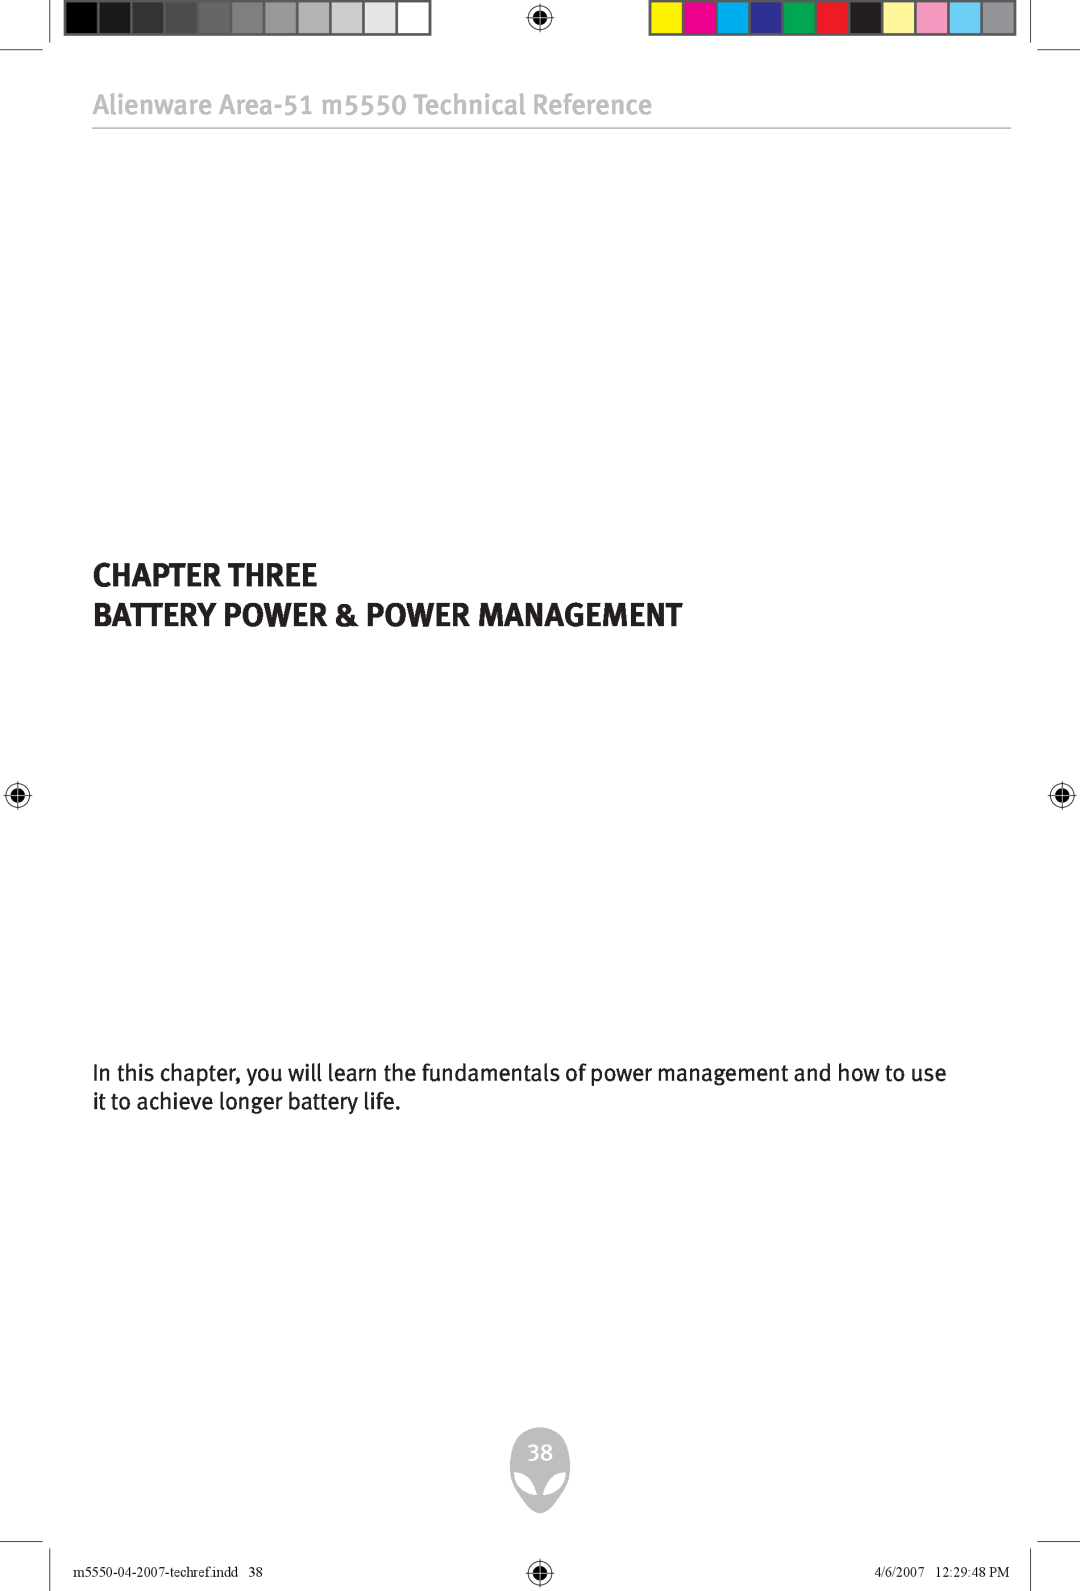 Alienware user manual Chapter Three Battery Power & Power Management, Alienware Area-51 m5550 Technical Reference 